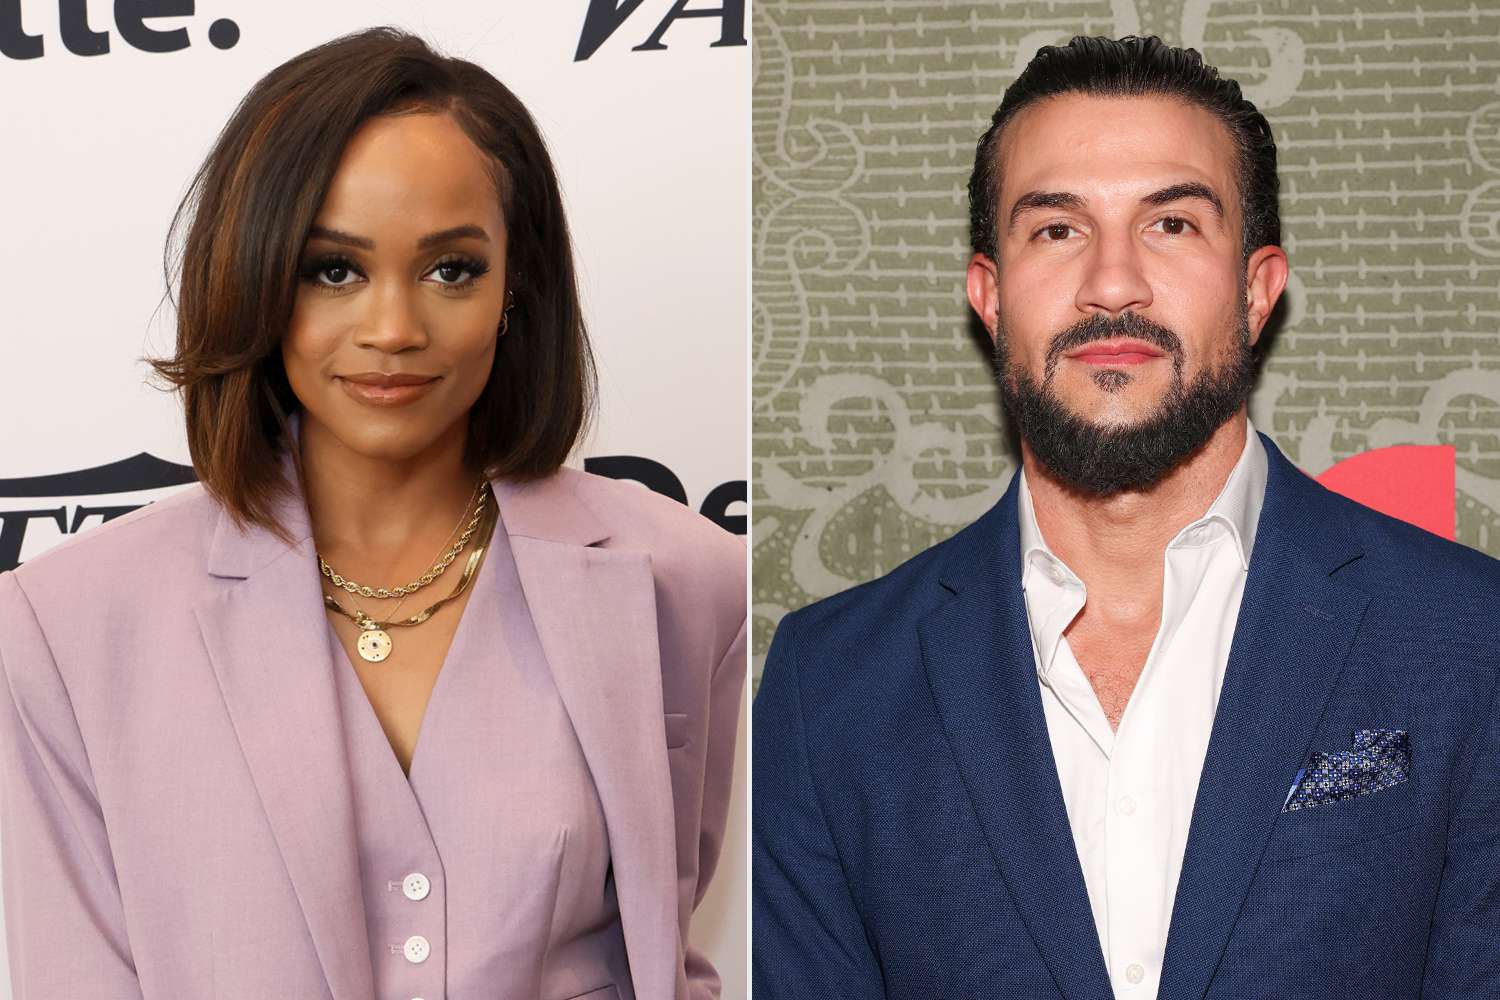 Bryan Abasolo Provides New Text Messages, Refutes Claim Rachel Lindsay Was 'Shocked' by Him Filing for Divorce